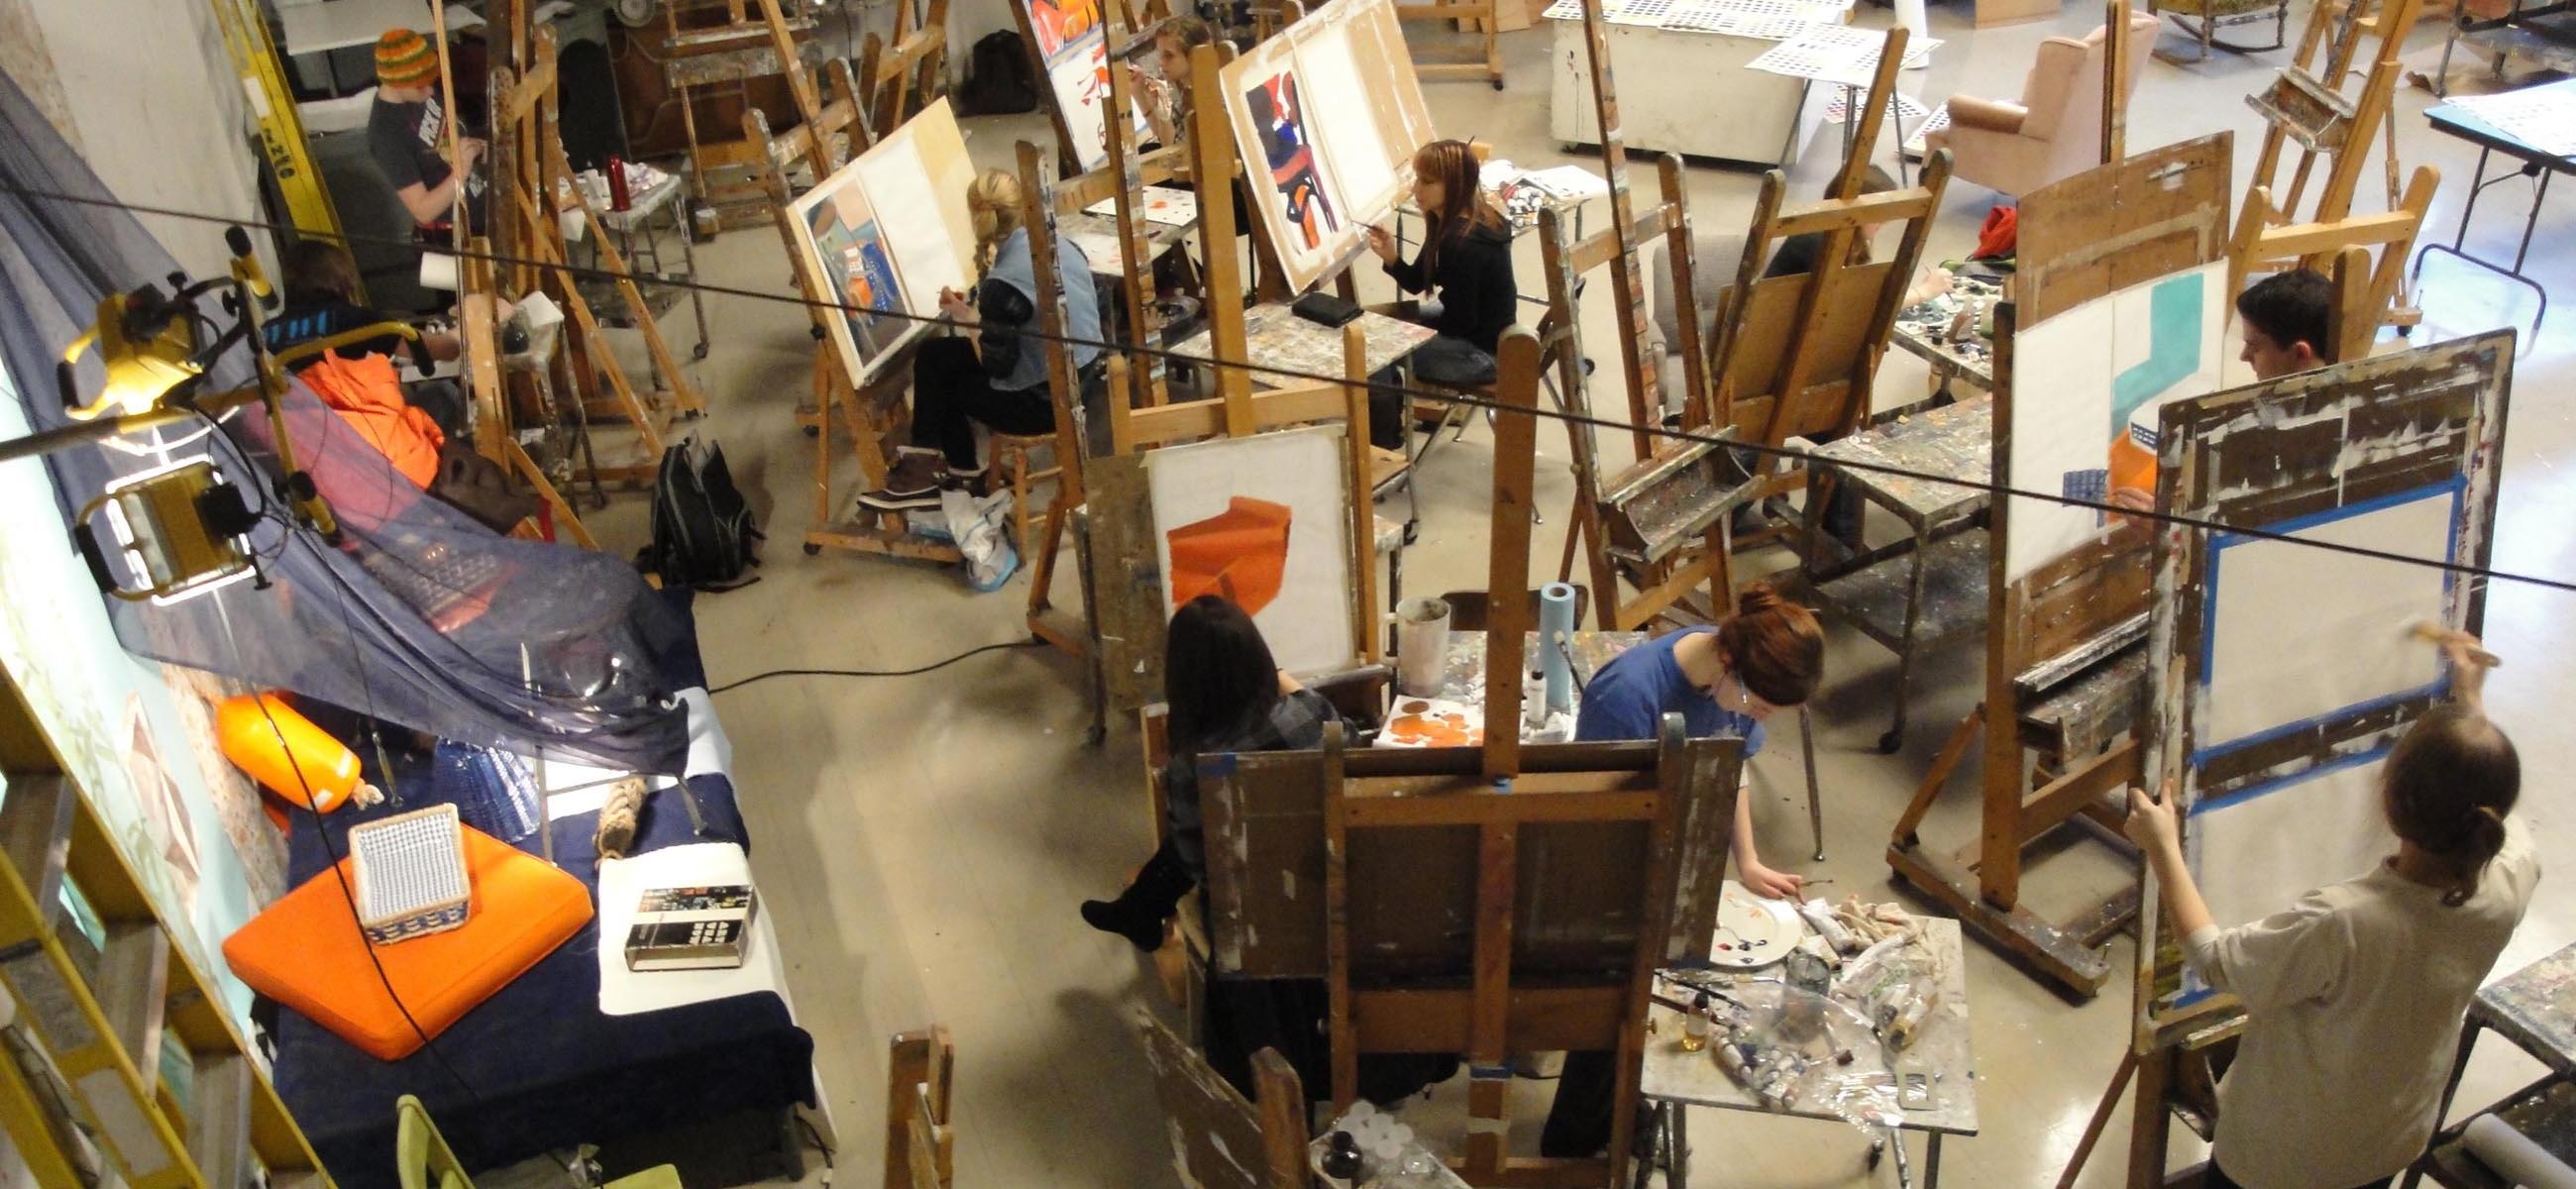 an overhead view of a large painting studio crowded with easels and cluttered with painting tools